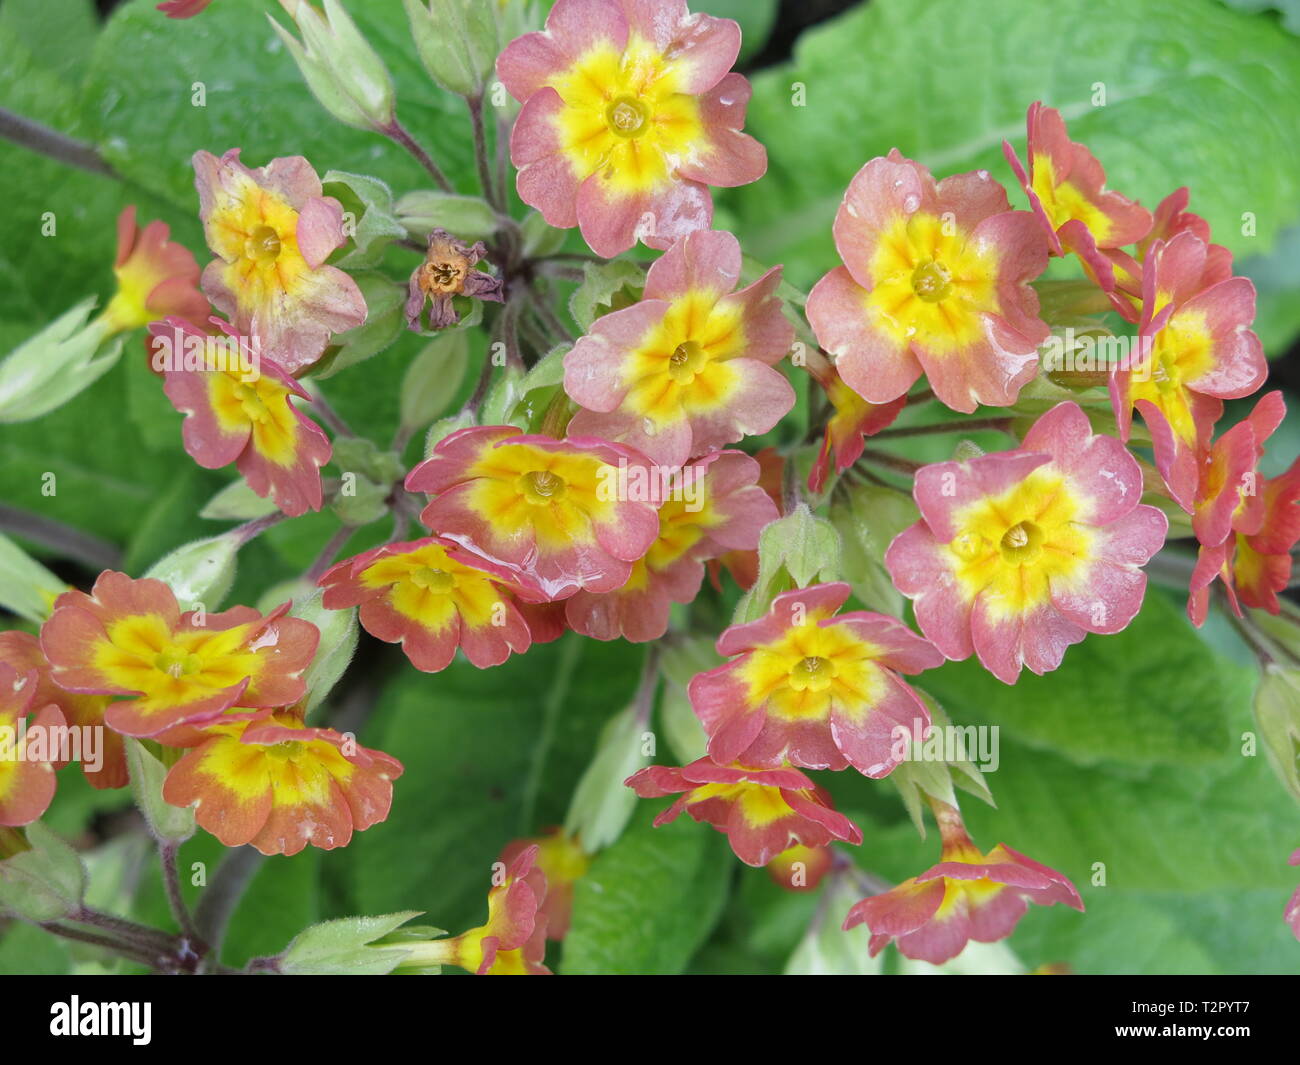 Spring-flowering primroses with nodding, petite, yellow & pink flowers thrive in a shady border in an English garden Stock Photo